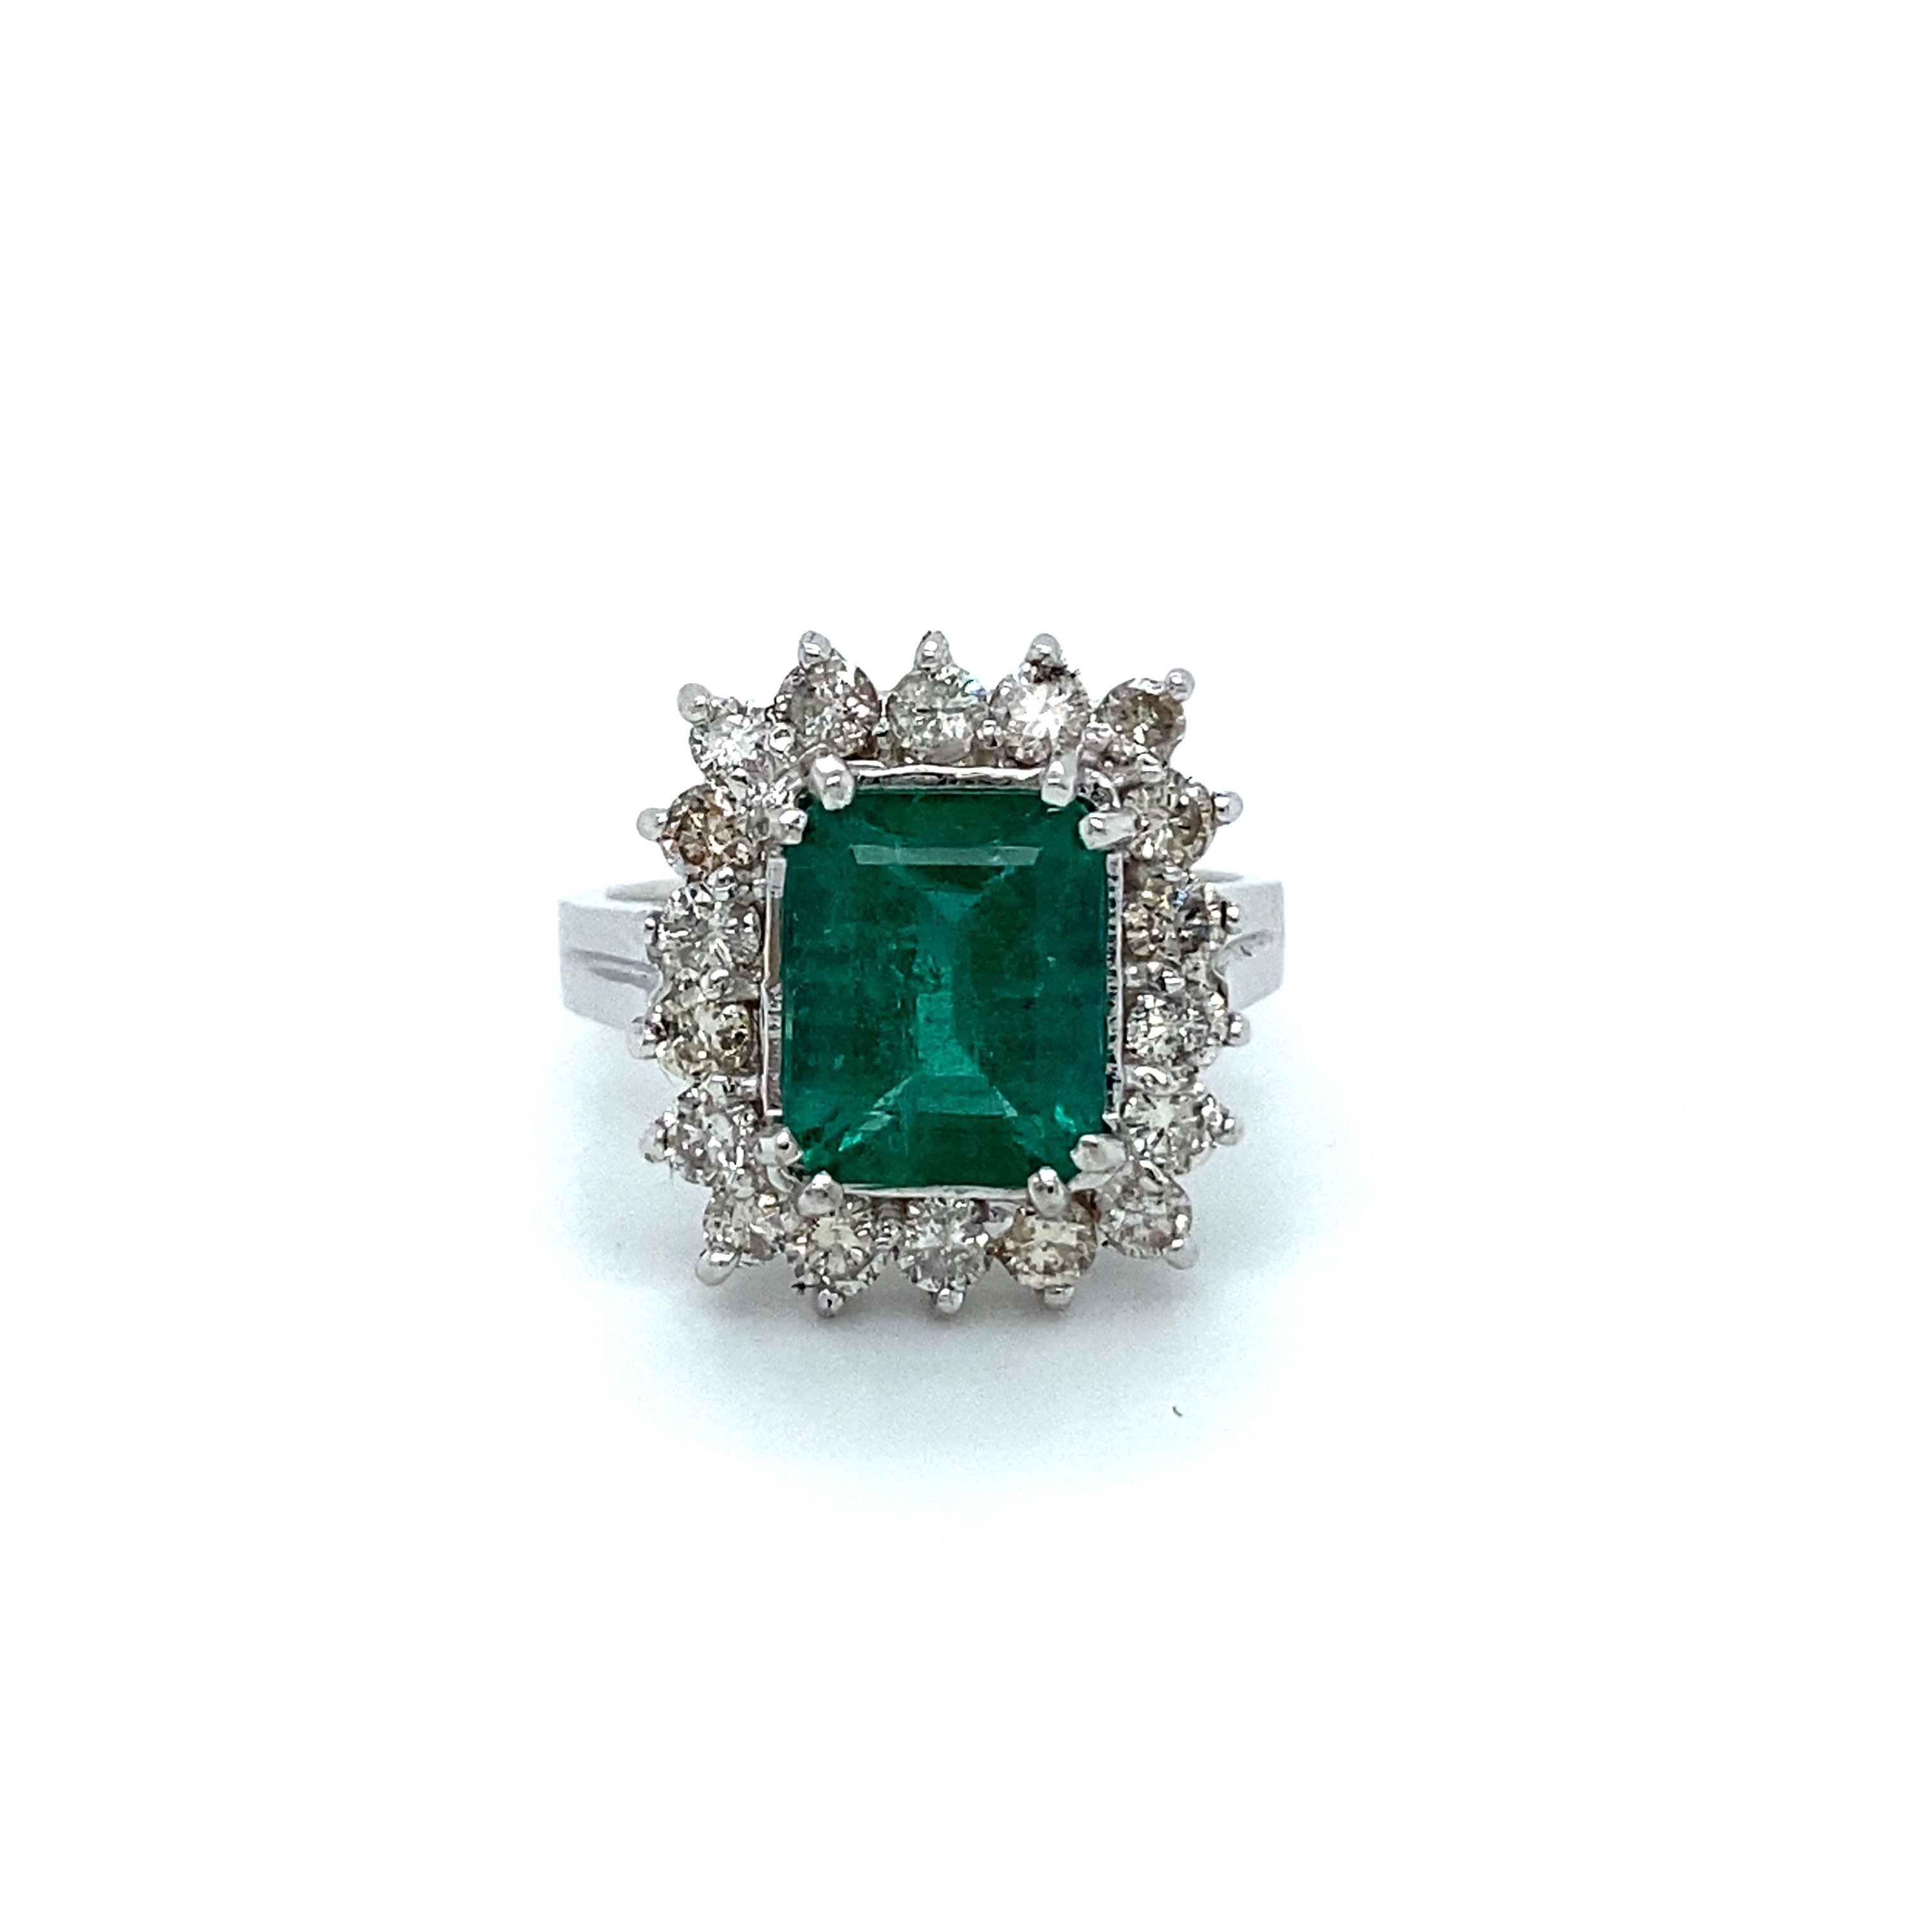 Whoa there gorgeous! This Beautiful Vintage Emerald and Diamond Cut Halo Ring is just stunning. Crafted in 14K White Gold, the ring is a classic halo design, with the shaping of the ring following the cut of center. In the center, the ring holds One